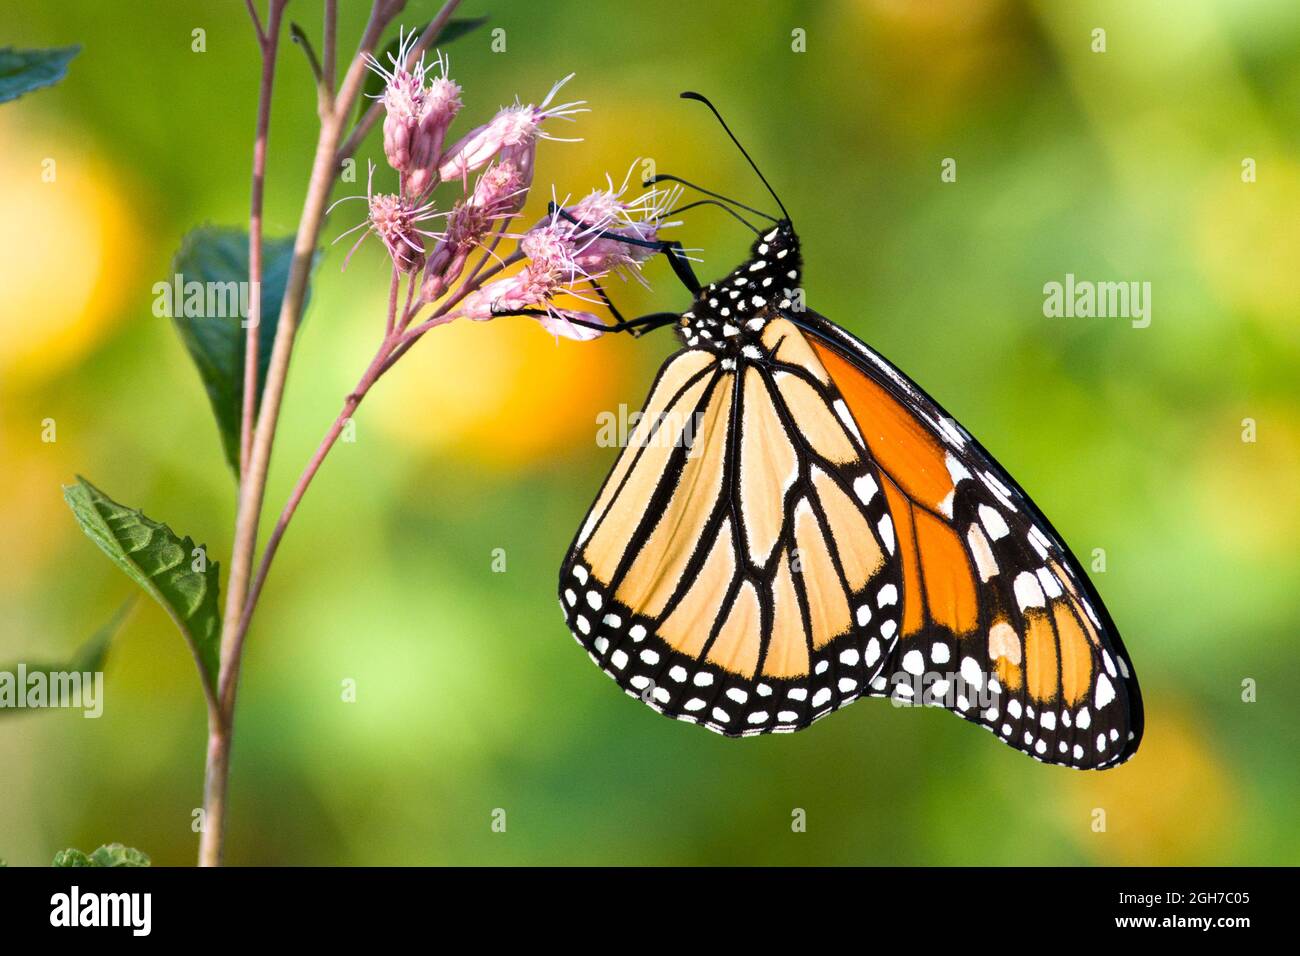 An adult monarch butterfly (Danaus plexippus) nectaring on a flower during fall migration Stock Photo